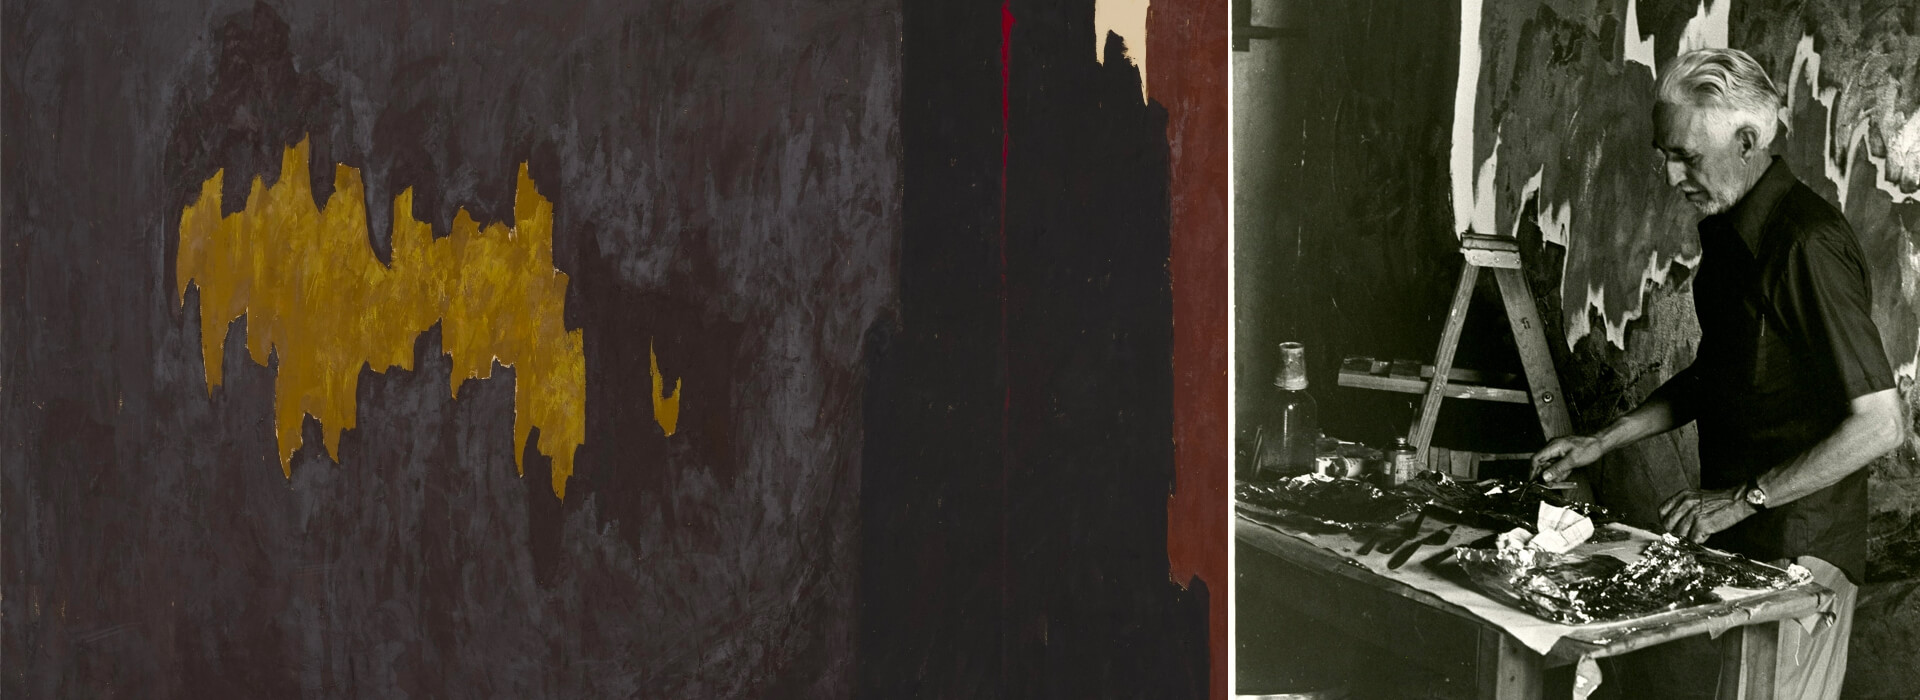 Detailed image of abstract Clyfford Still painting and photo of Clyfford Still working on the painting